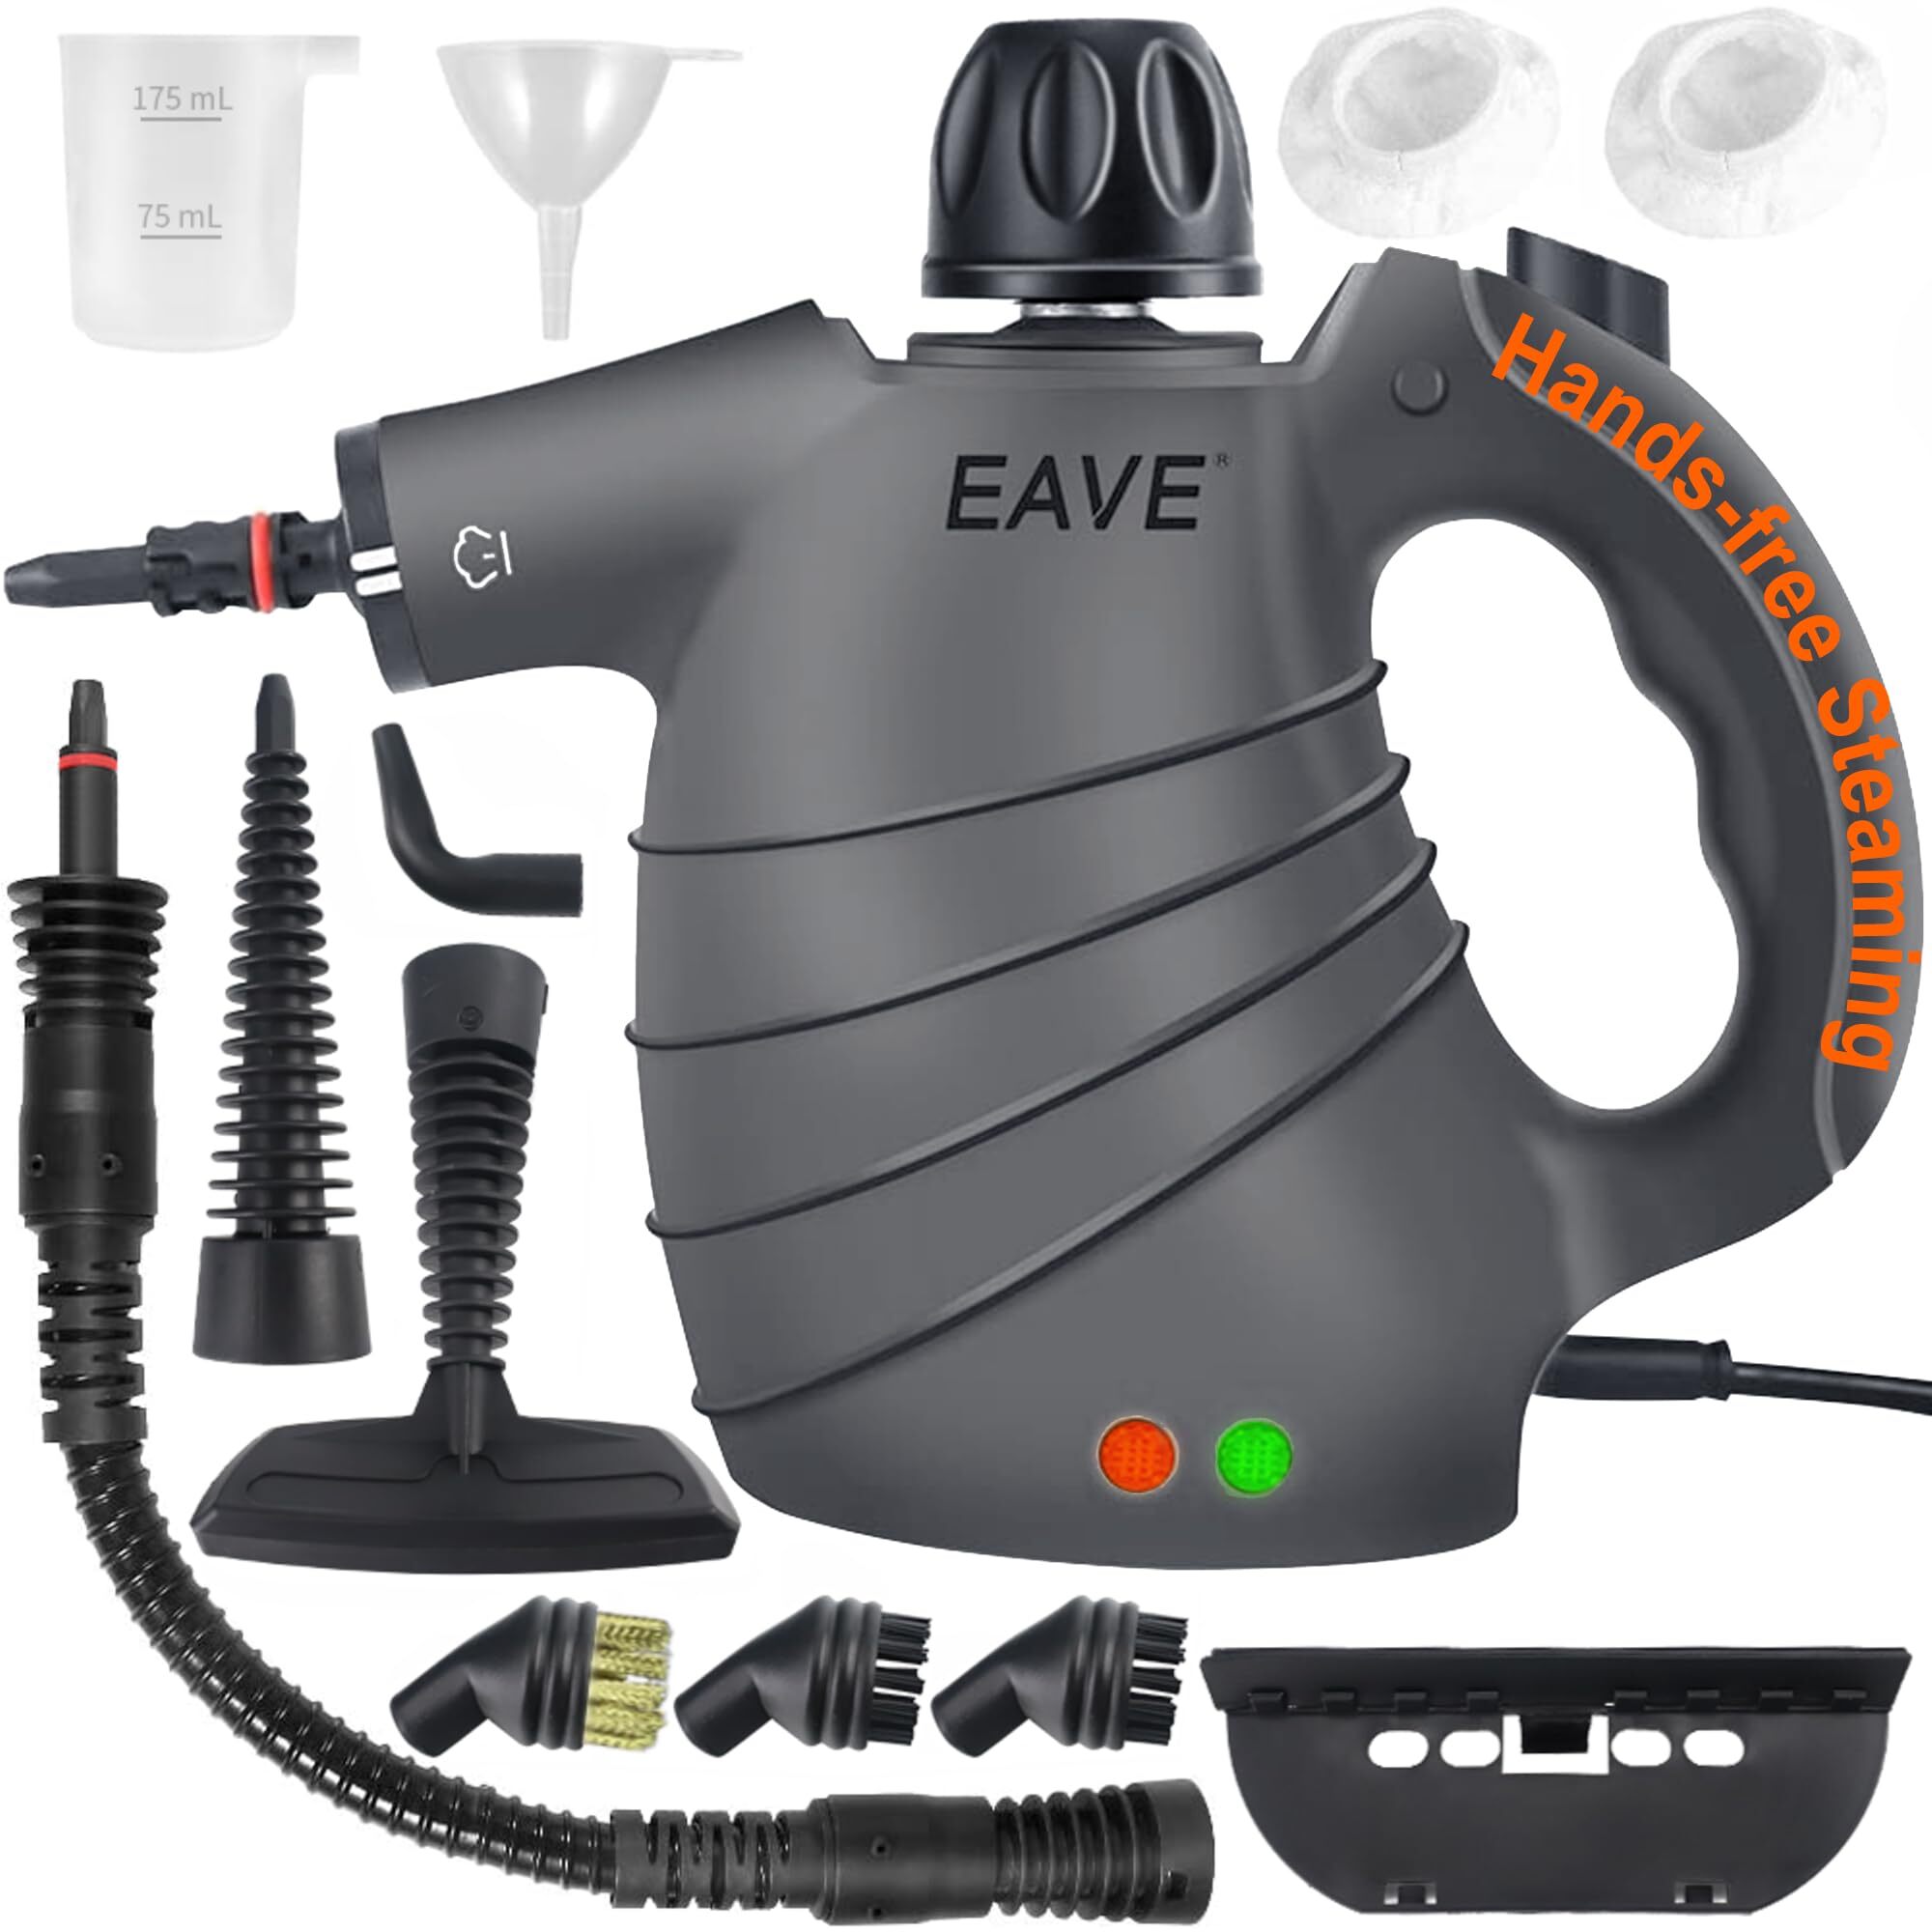 EAVE Handheld Steam Cleaner, Portable Steamer for Cleaning, with Steam Lock Button for Hands-free Steaming, 12 in 1 Set Pressurized Hand Held Car Steamer for Furniture, Upholstery,Tile Grout, Home Use